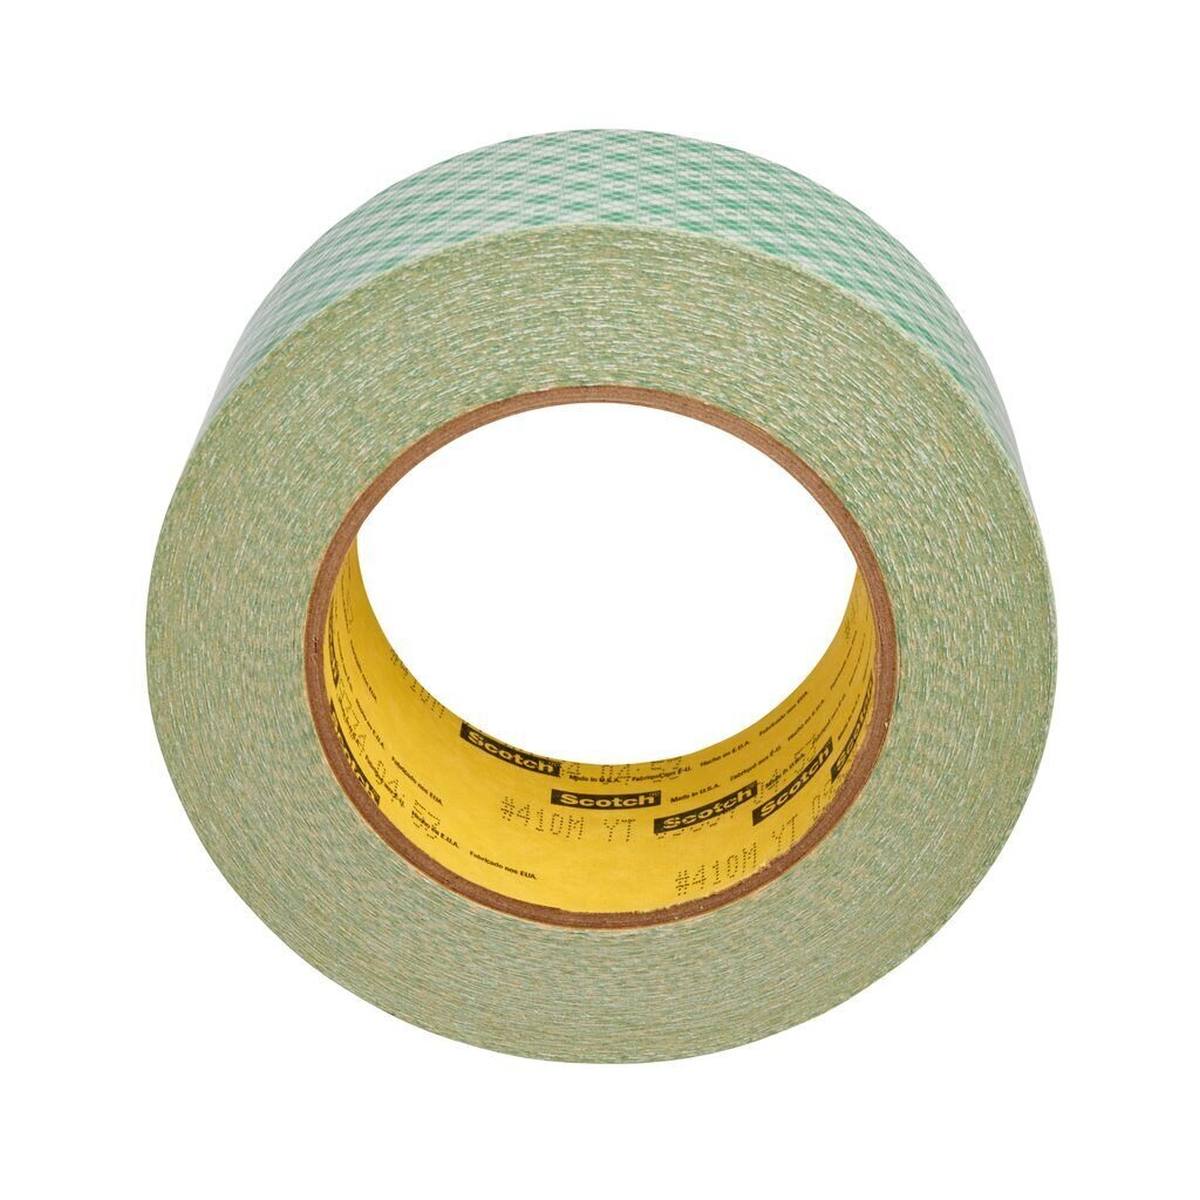 3M Double-sided adhesive tape with non-woven paper backing 410M, white, 305 mm x 33 m, 0.13 mm